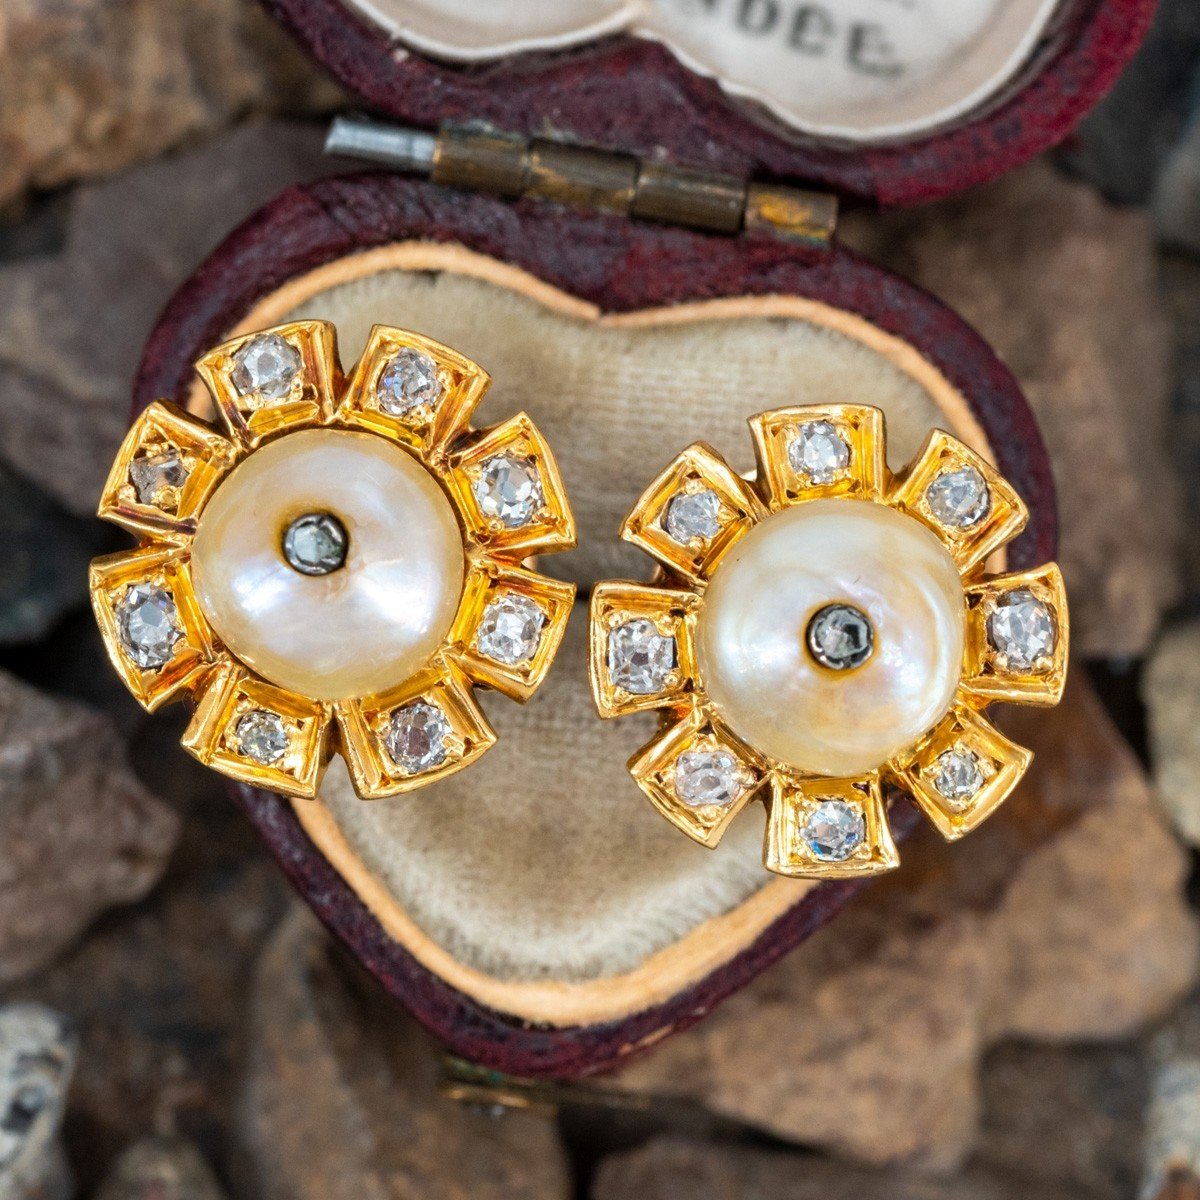 Antique Edwardian Natural Pearls & Diamonds Studs Earrings, 18kt Yellow  Gold And Platinum, Circa 1910 | 744359 | Sellingantiques.co.uk